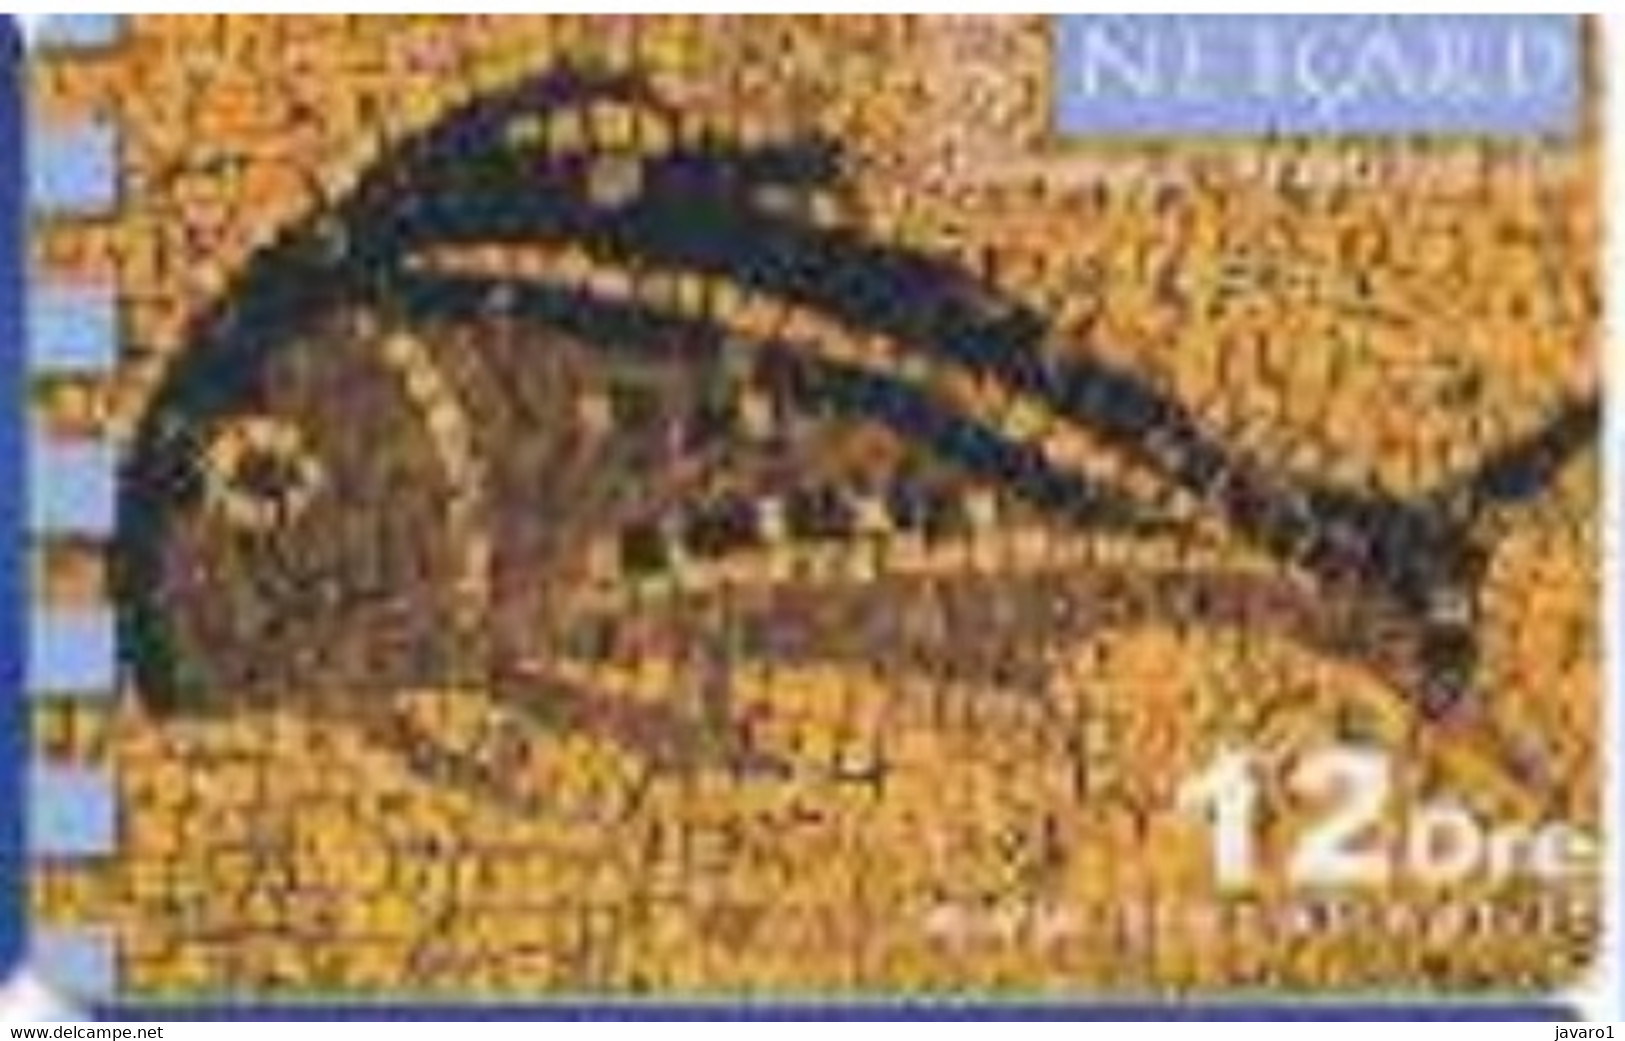 ITALY : ITA17 (7) 25000 TISCALI NetCard Mosaic Fish MINT Exp: 6 MONTHS - To Identify